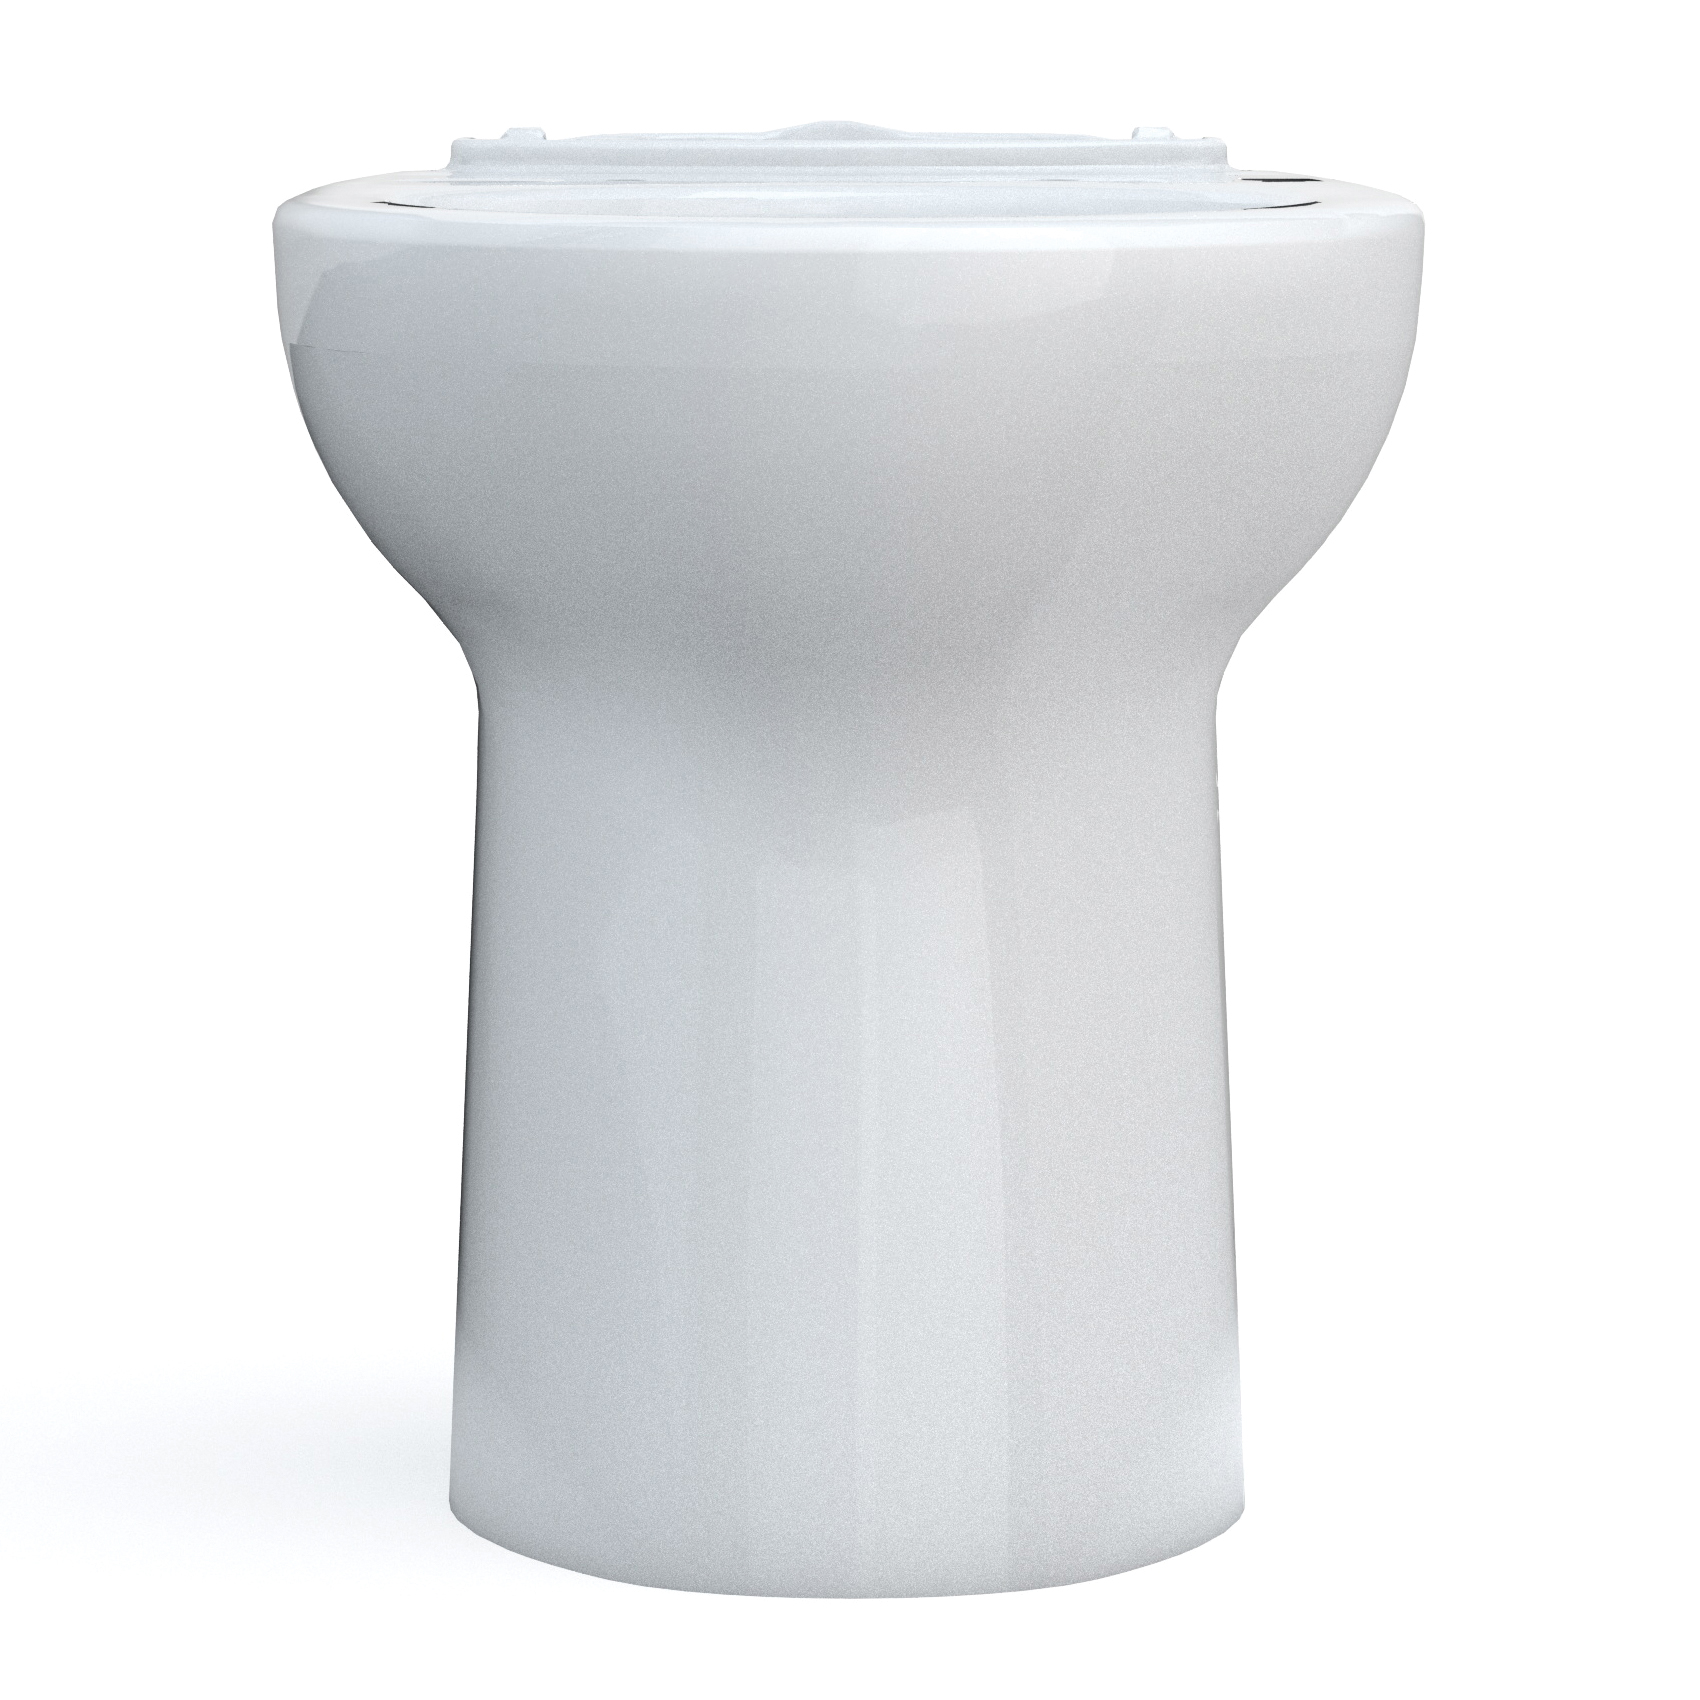 Toto® C776CEGT40#01 Universal Height Toilet Bowl, Drake®, Cotton White, Elongated Shape, 12 in Rough-In, 14-15/16 in H Rim, 2-1/8 in Trapway